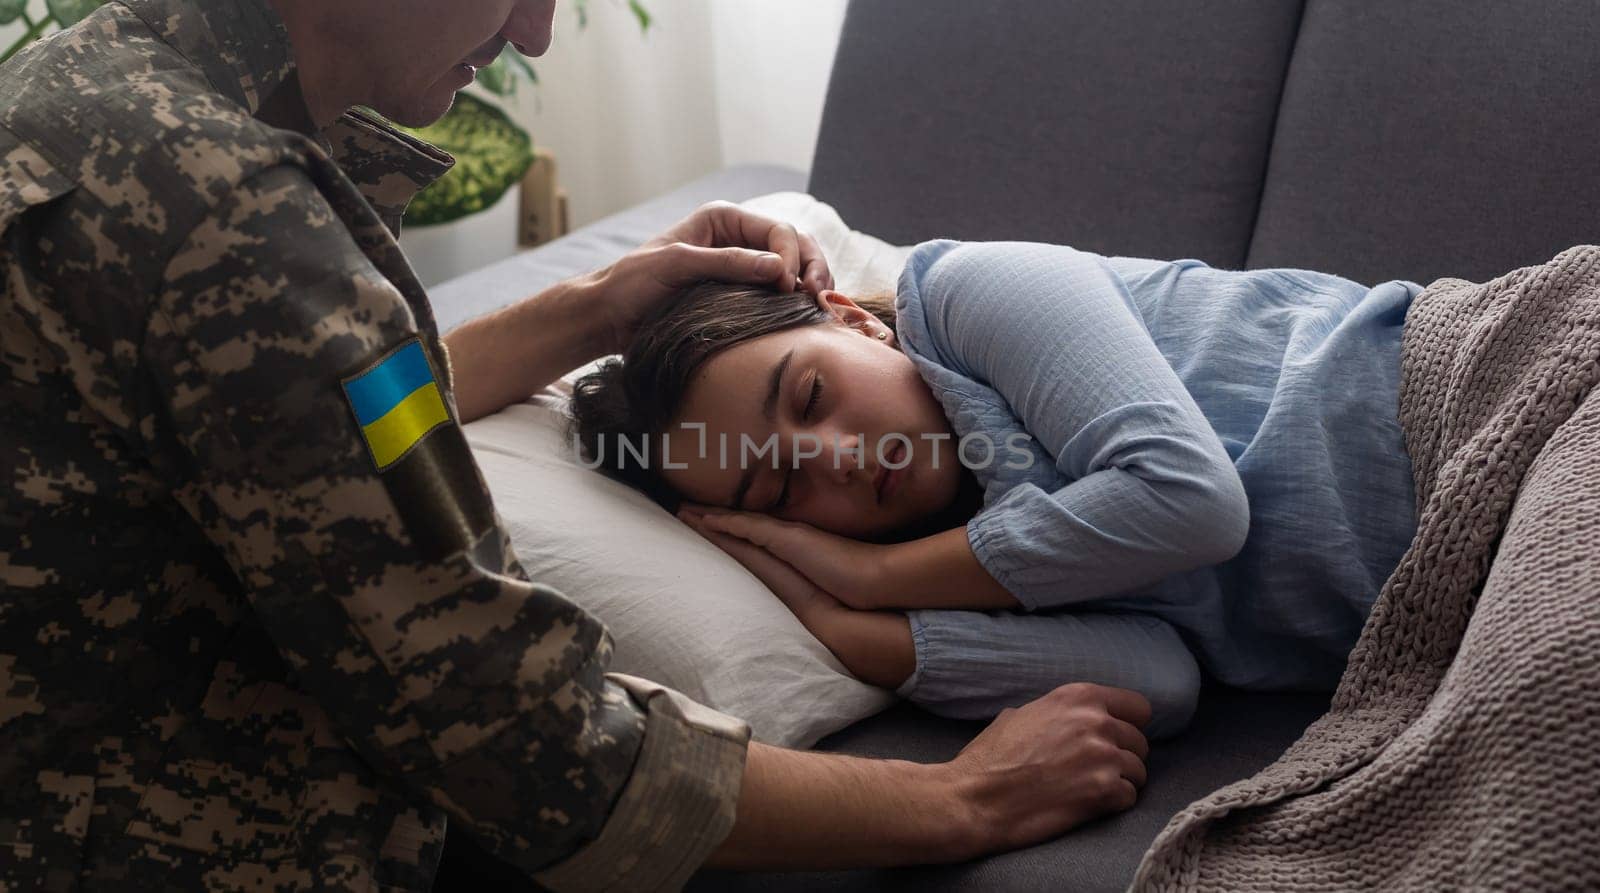 Soldier in Ukrainian military uniform kissing his daughter while she sleeping on sofa at home. Family reunion